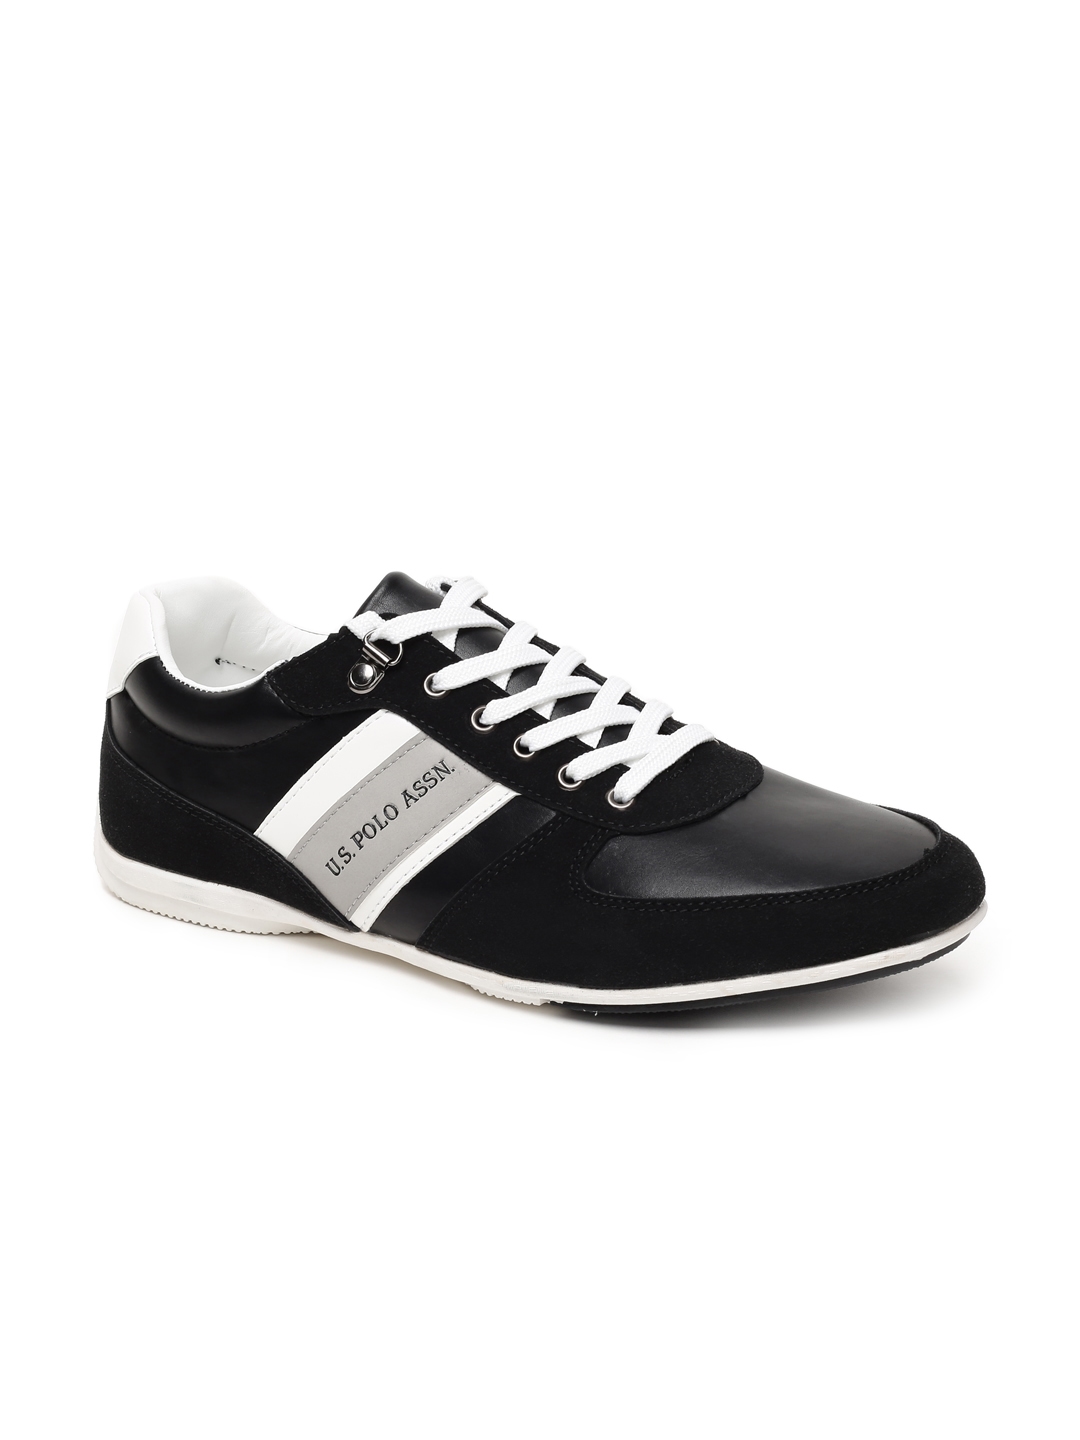 us polo black sneakers